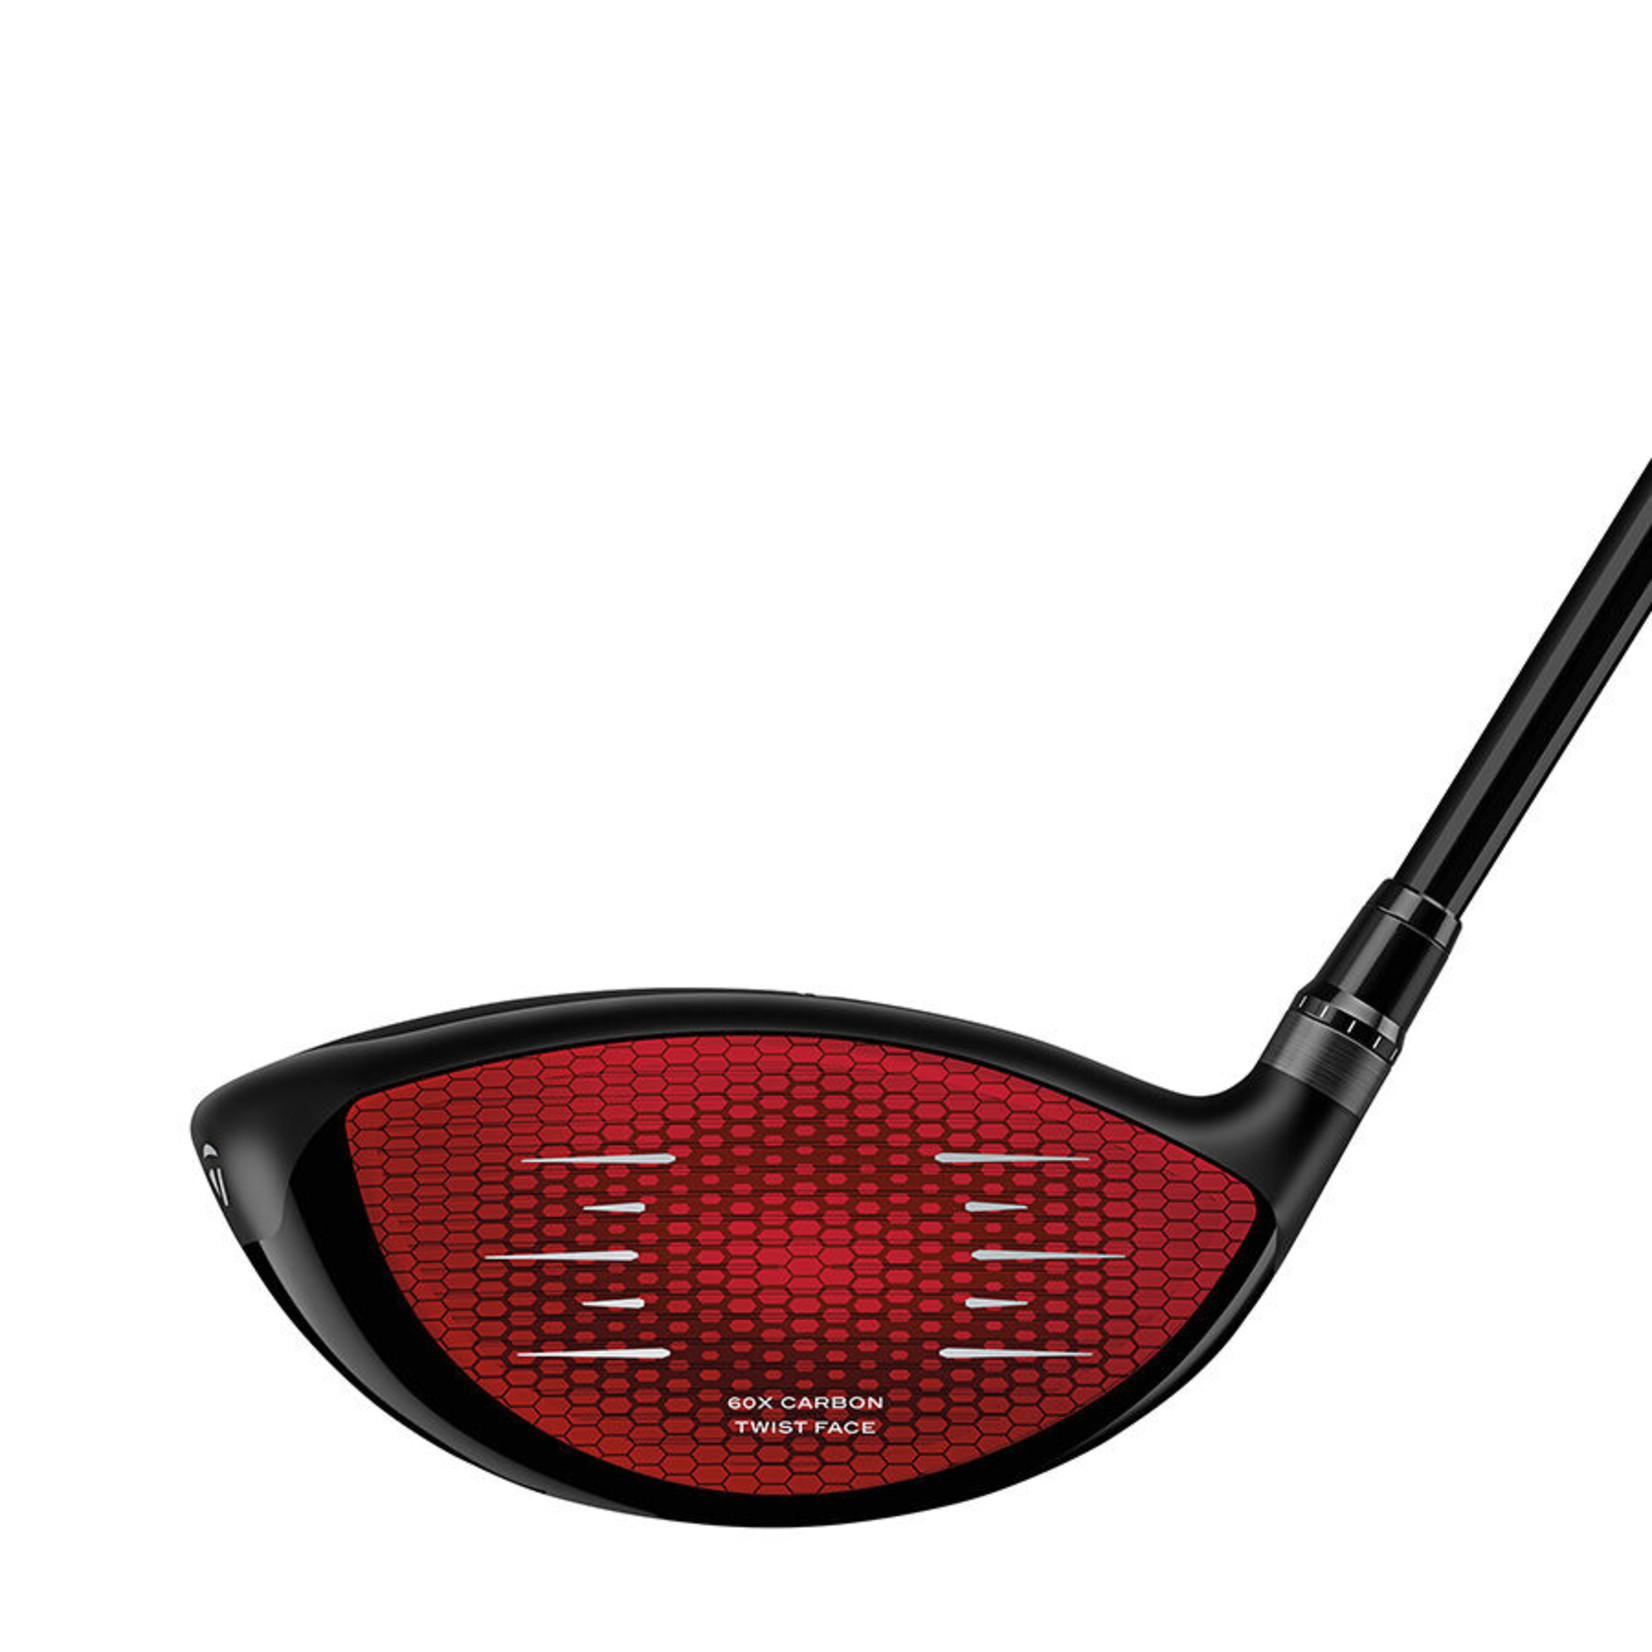 TAYLORMADE STEALTH 2 DRIVER - RIGHT HAND